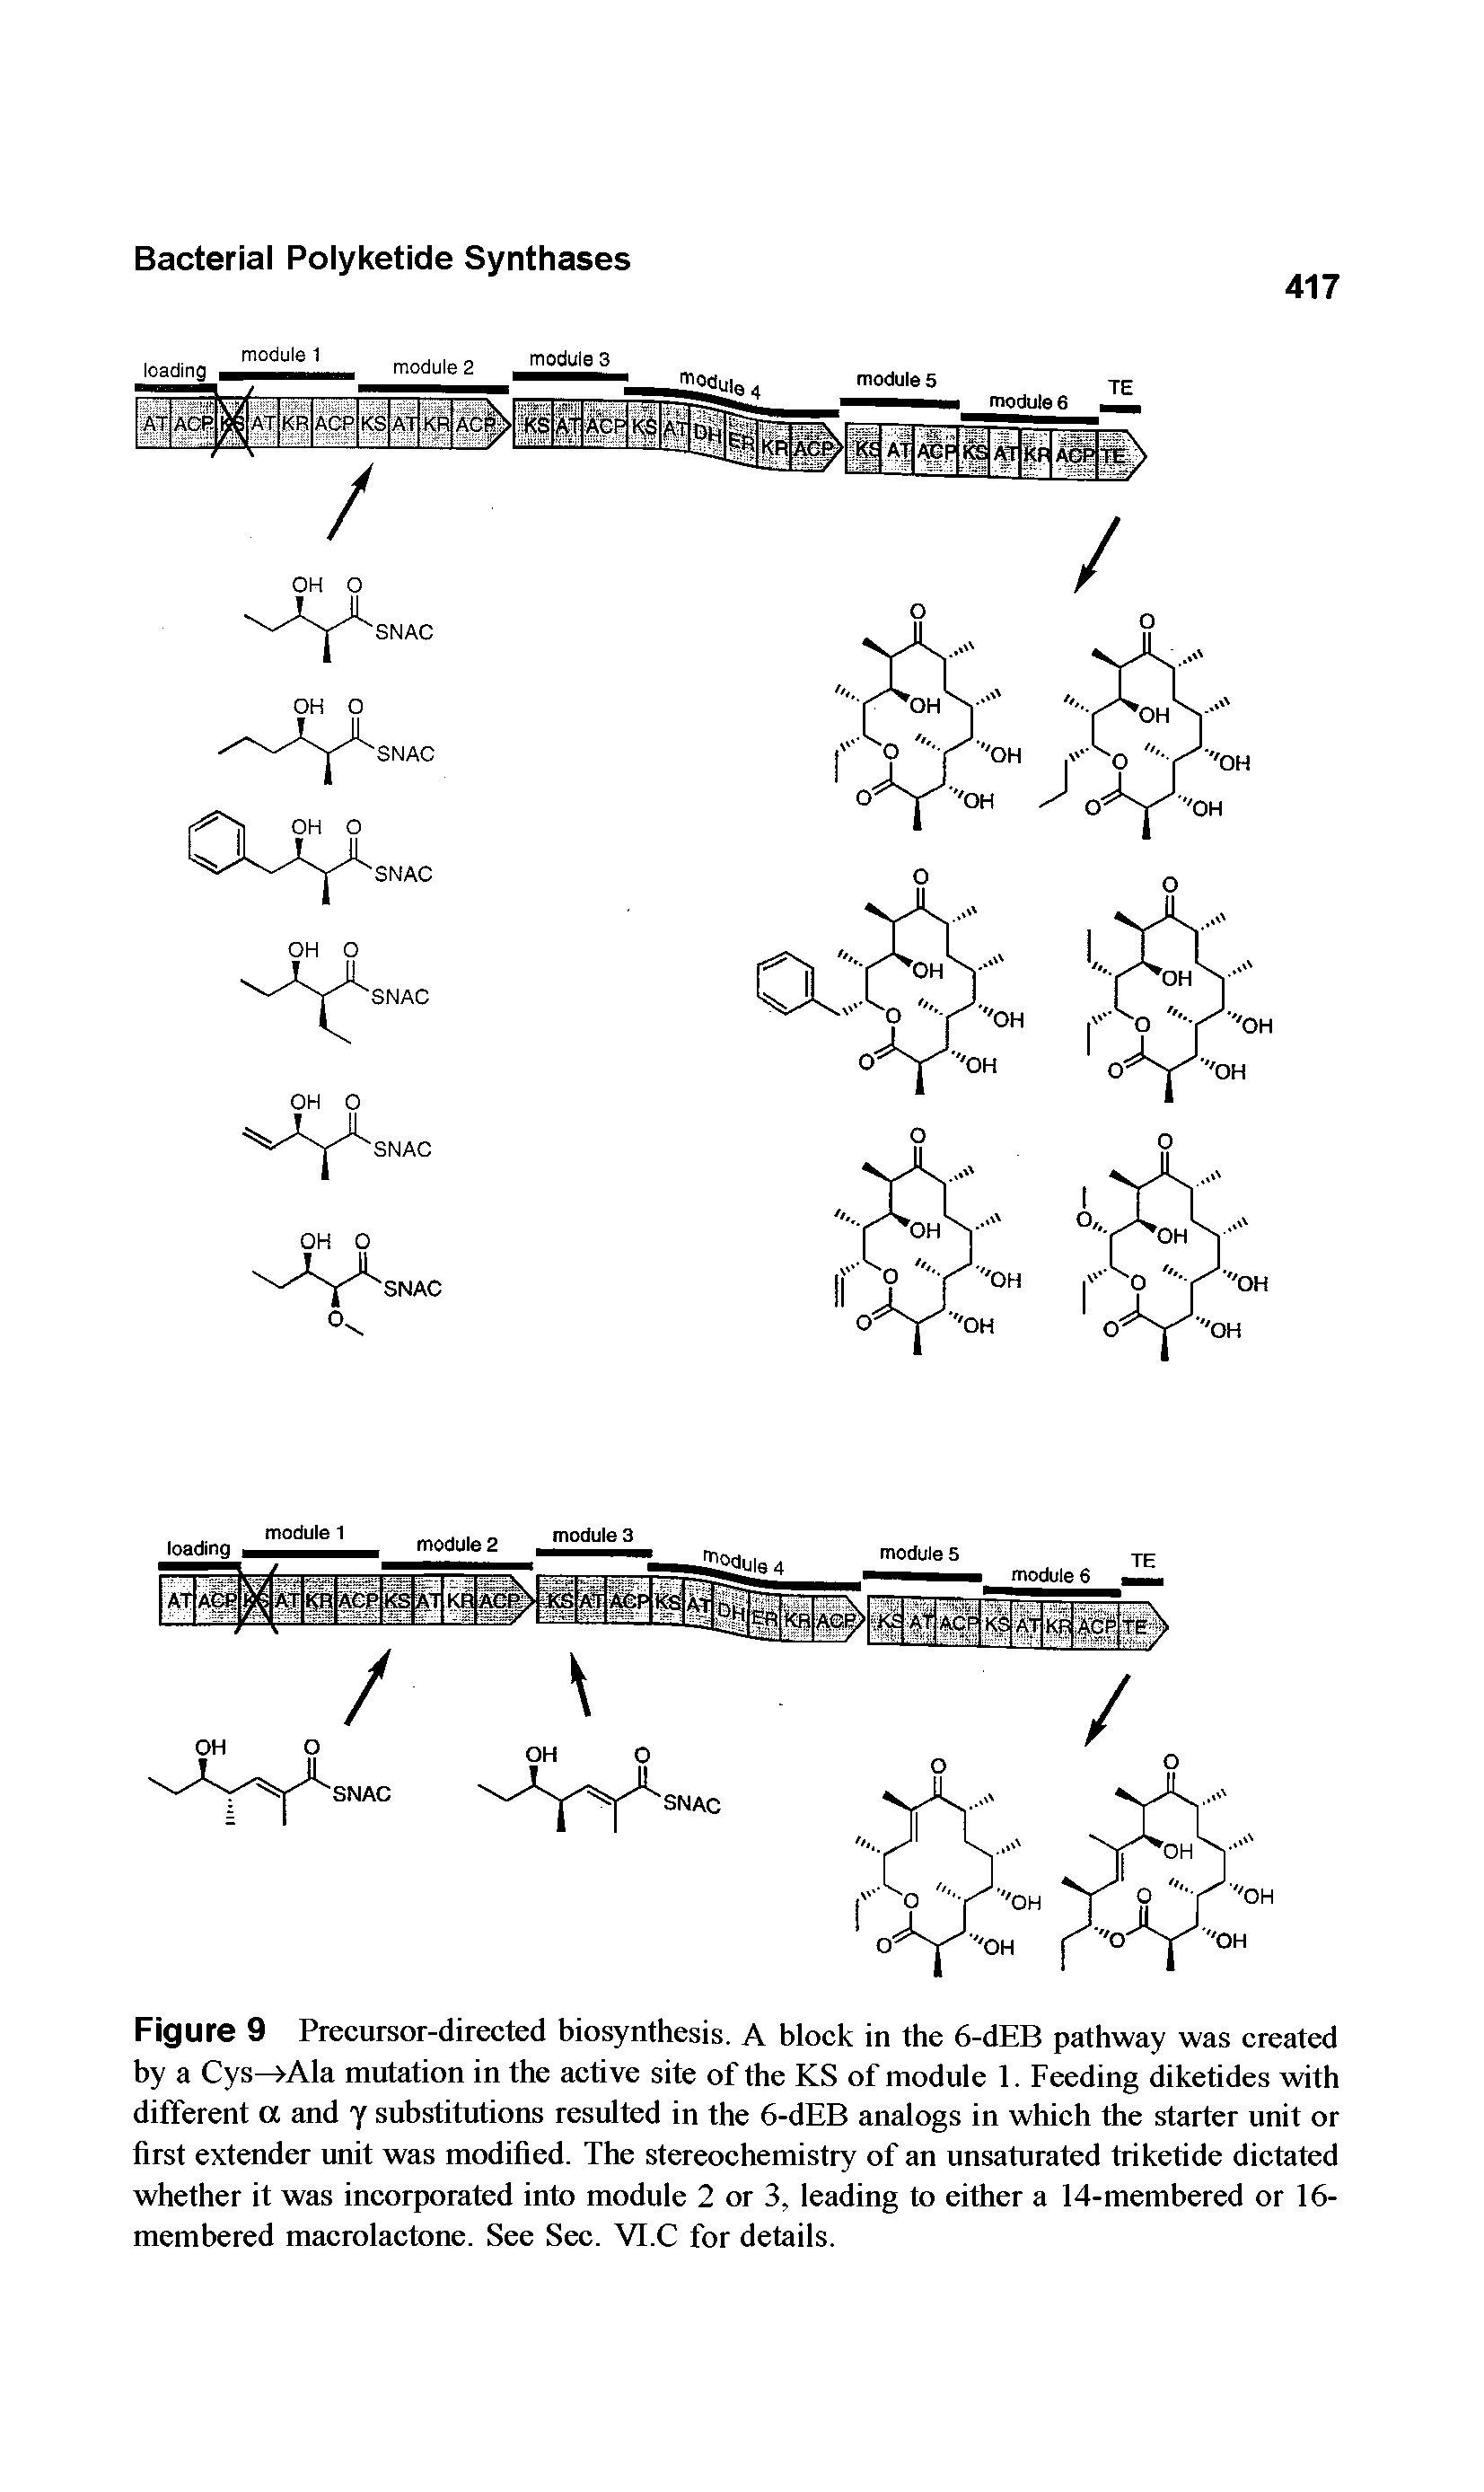 Figure 9 Precursor-directed biosynthesis. A block in the 6-dEB pathway was created by a Cys— Ala mutation in the active site of the KS of module 1. Feeding diketides with different a and j substitutions resulted in the 6-dEB analogs in which the starter unit or first extender unit was modified. The stereochemistry of an unsaturated triketide dictated whether it was incorporated into module 2 or 3, leading to either a 14-membered or 16-membered macrolactone. See Sec. VI.C for details.